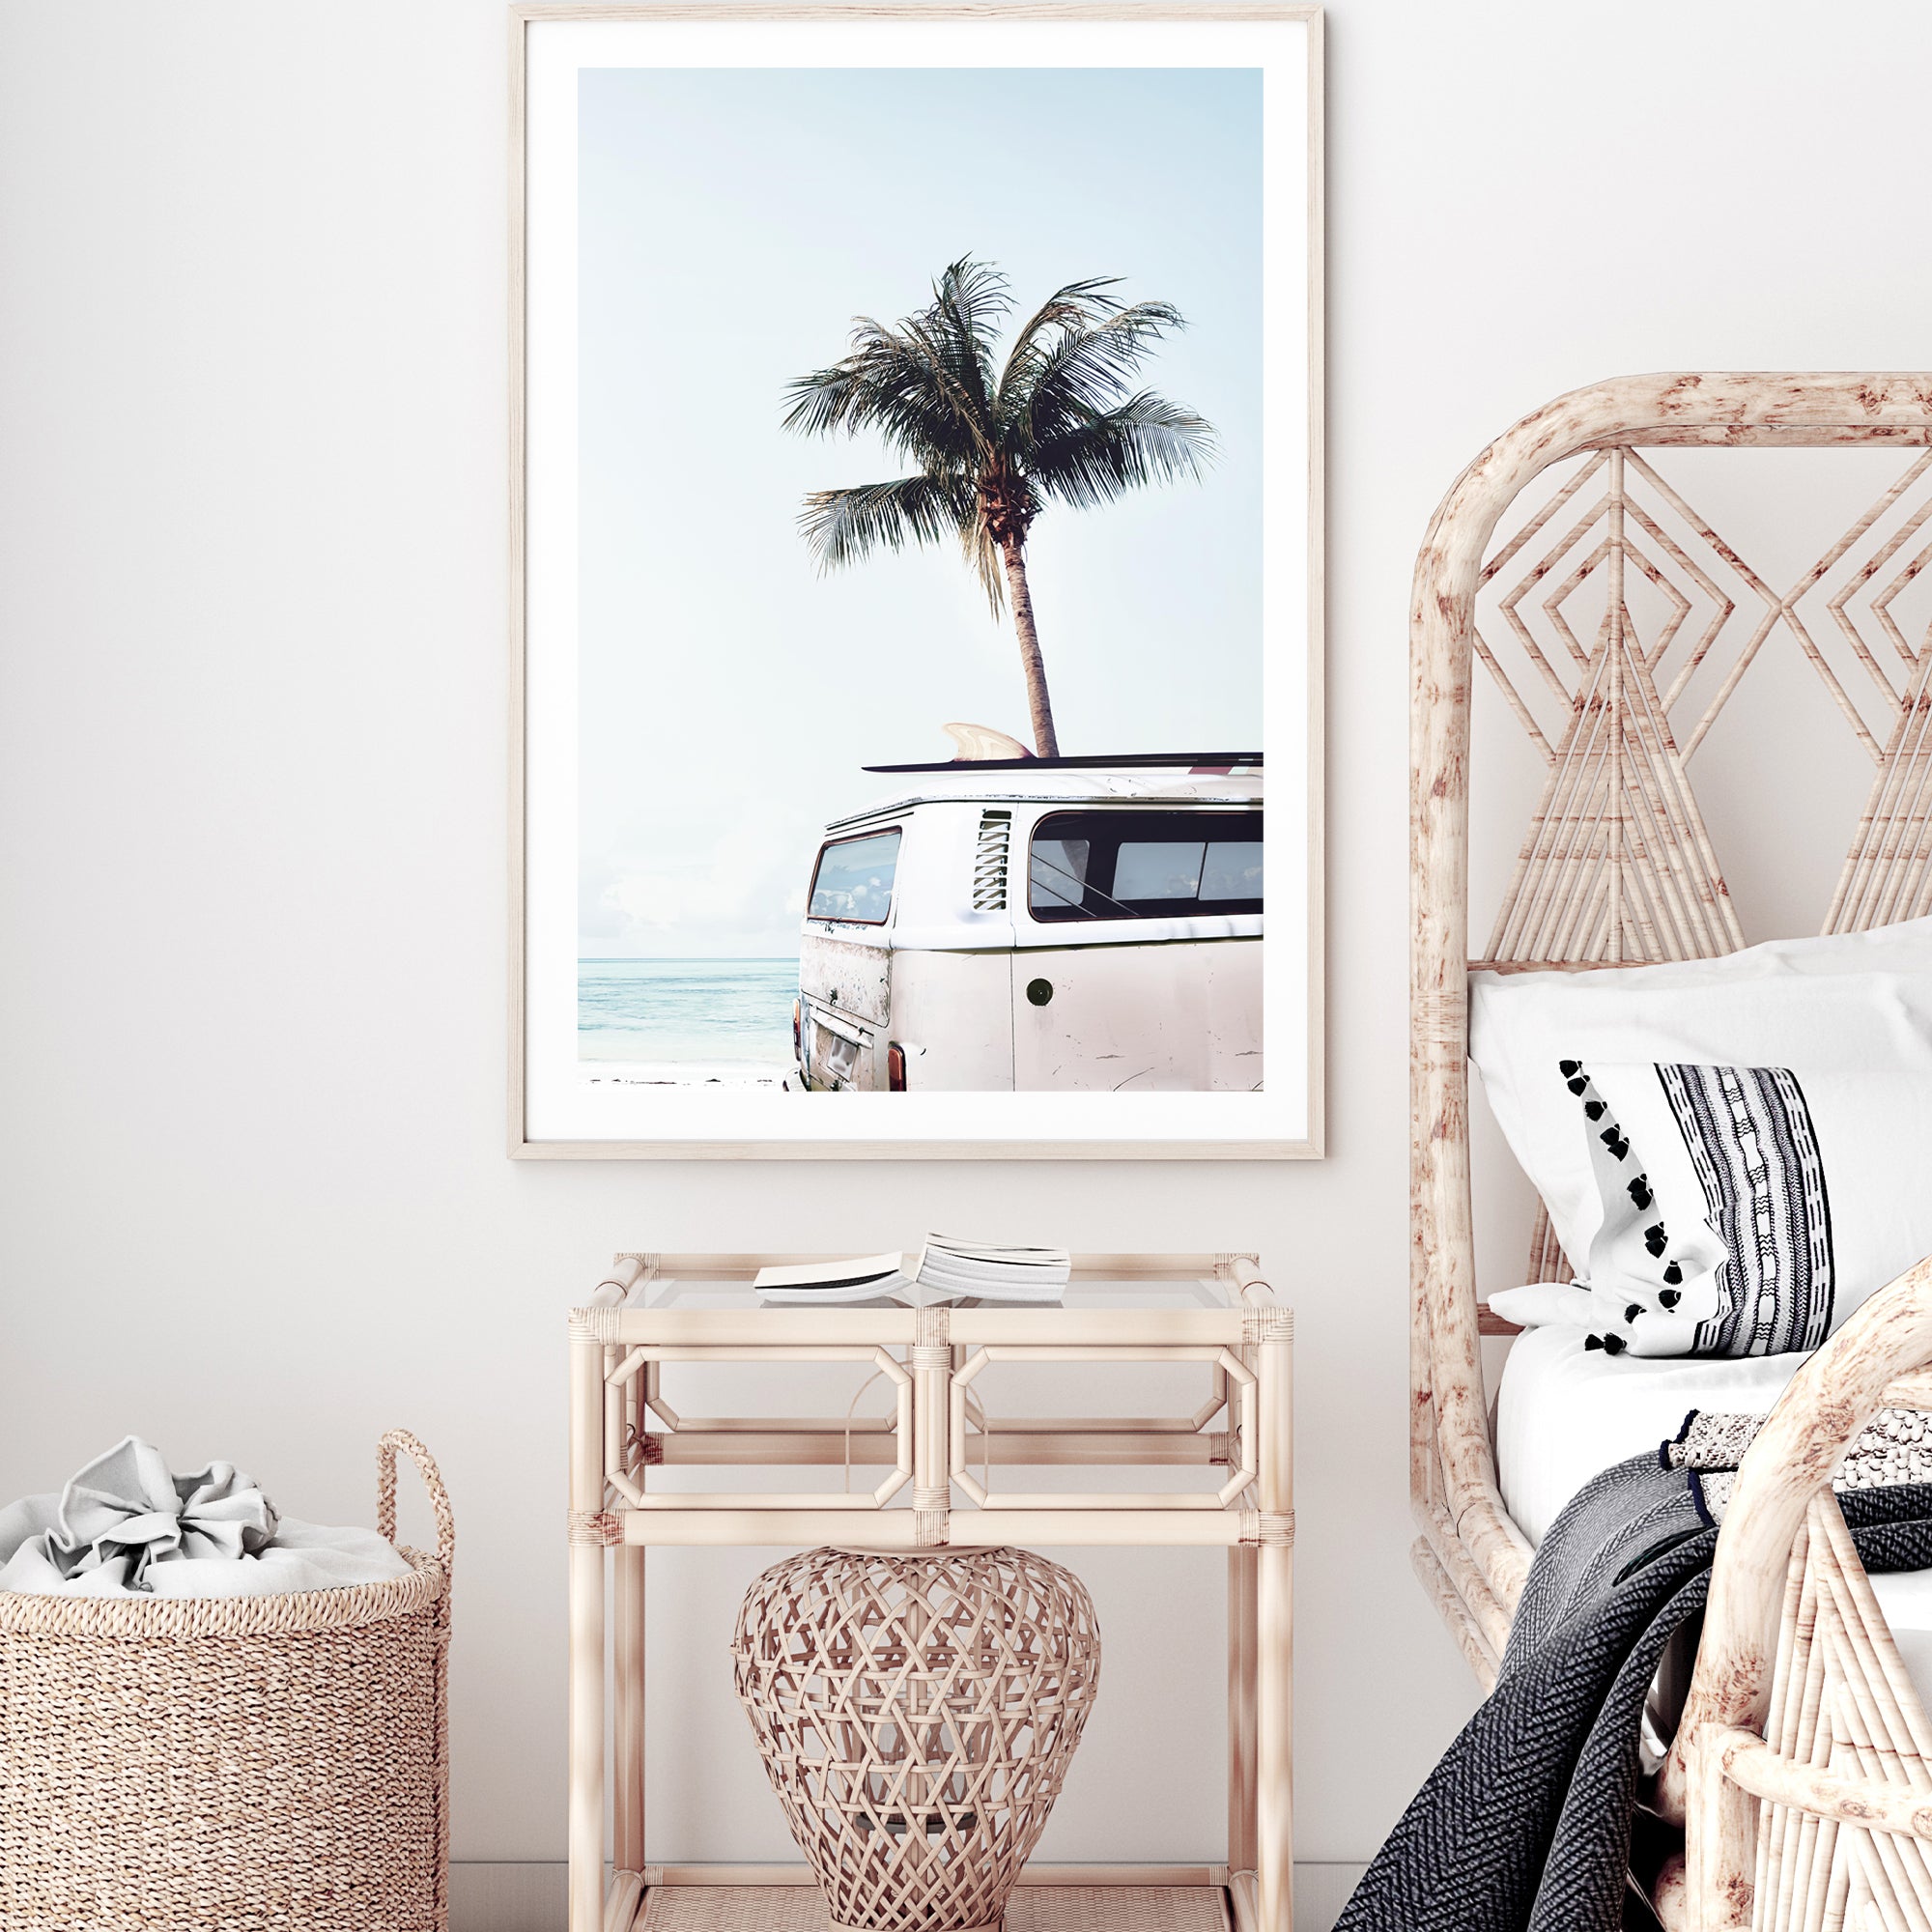 An artwork featuring a blue Kombi van at the beach with a blue sky and palm trees, available in framed or unframed prints.